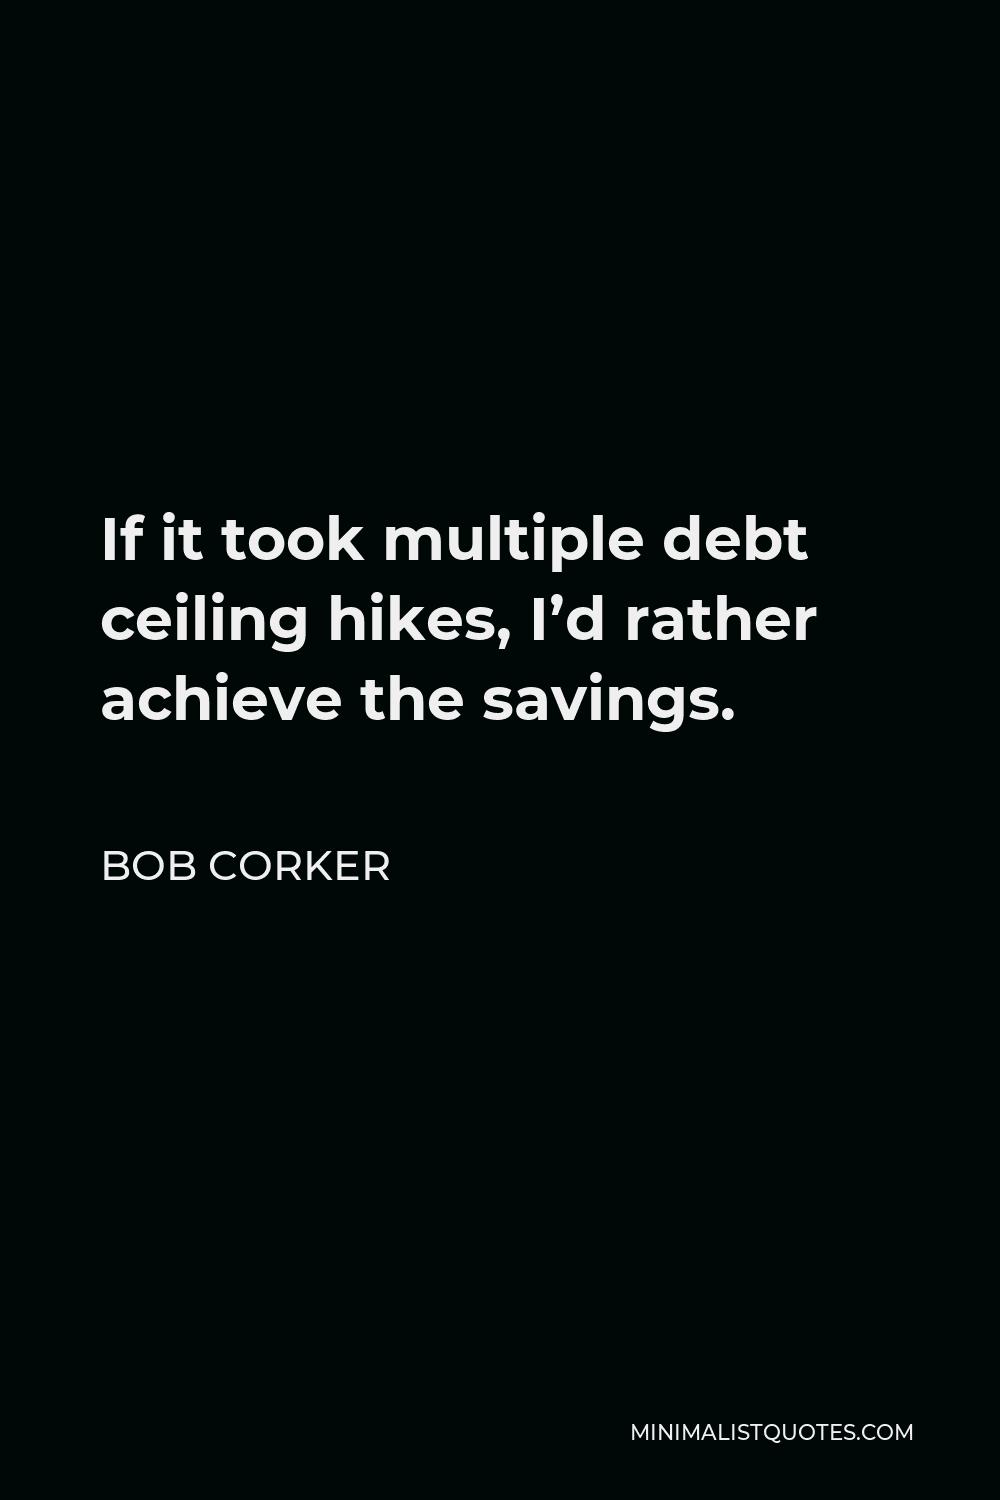 Bob Corker Quote - If it took multiple debt ceiling hikes, I’d rather achieve the savings.